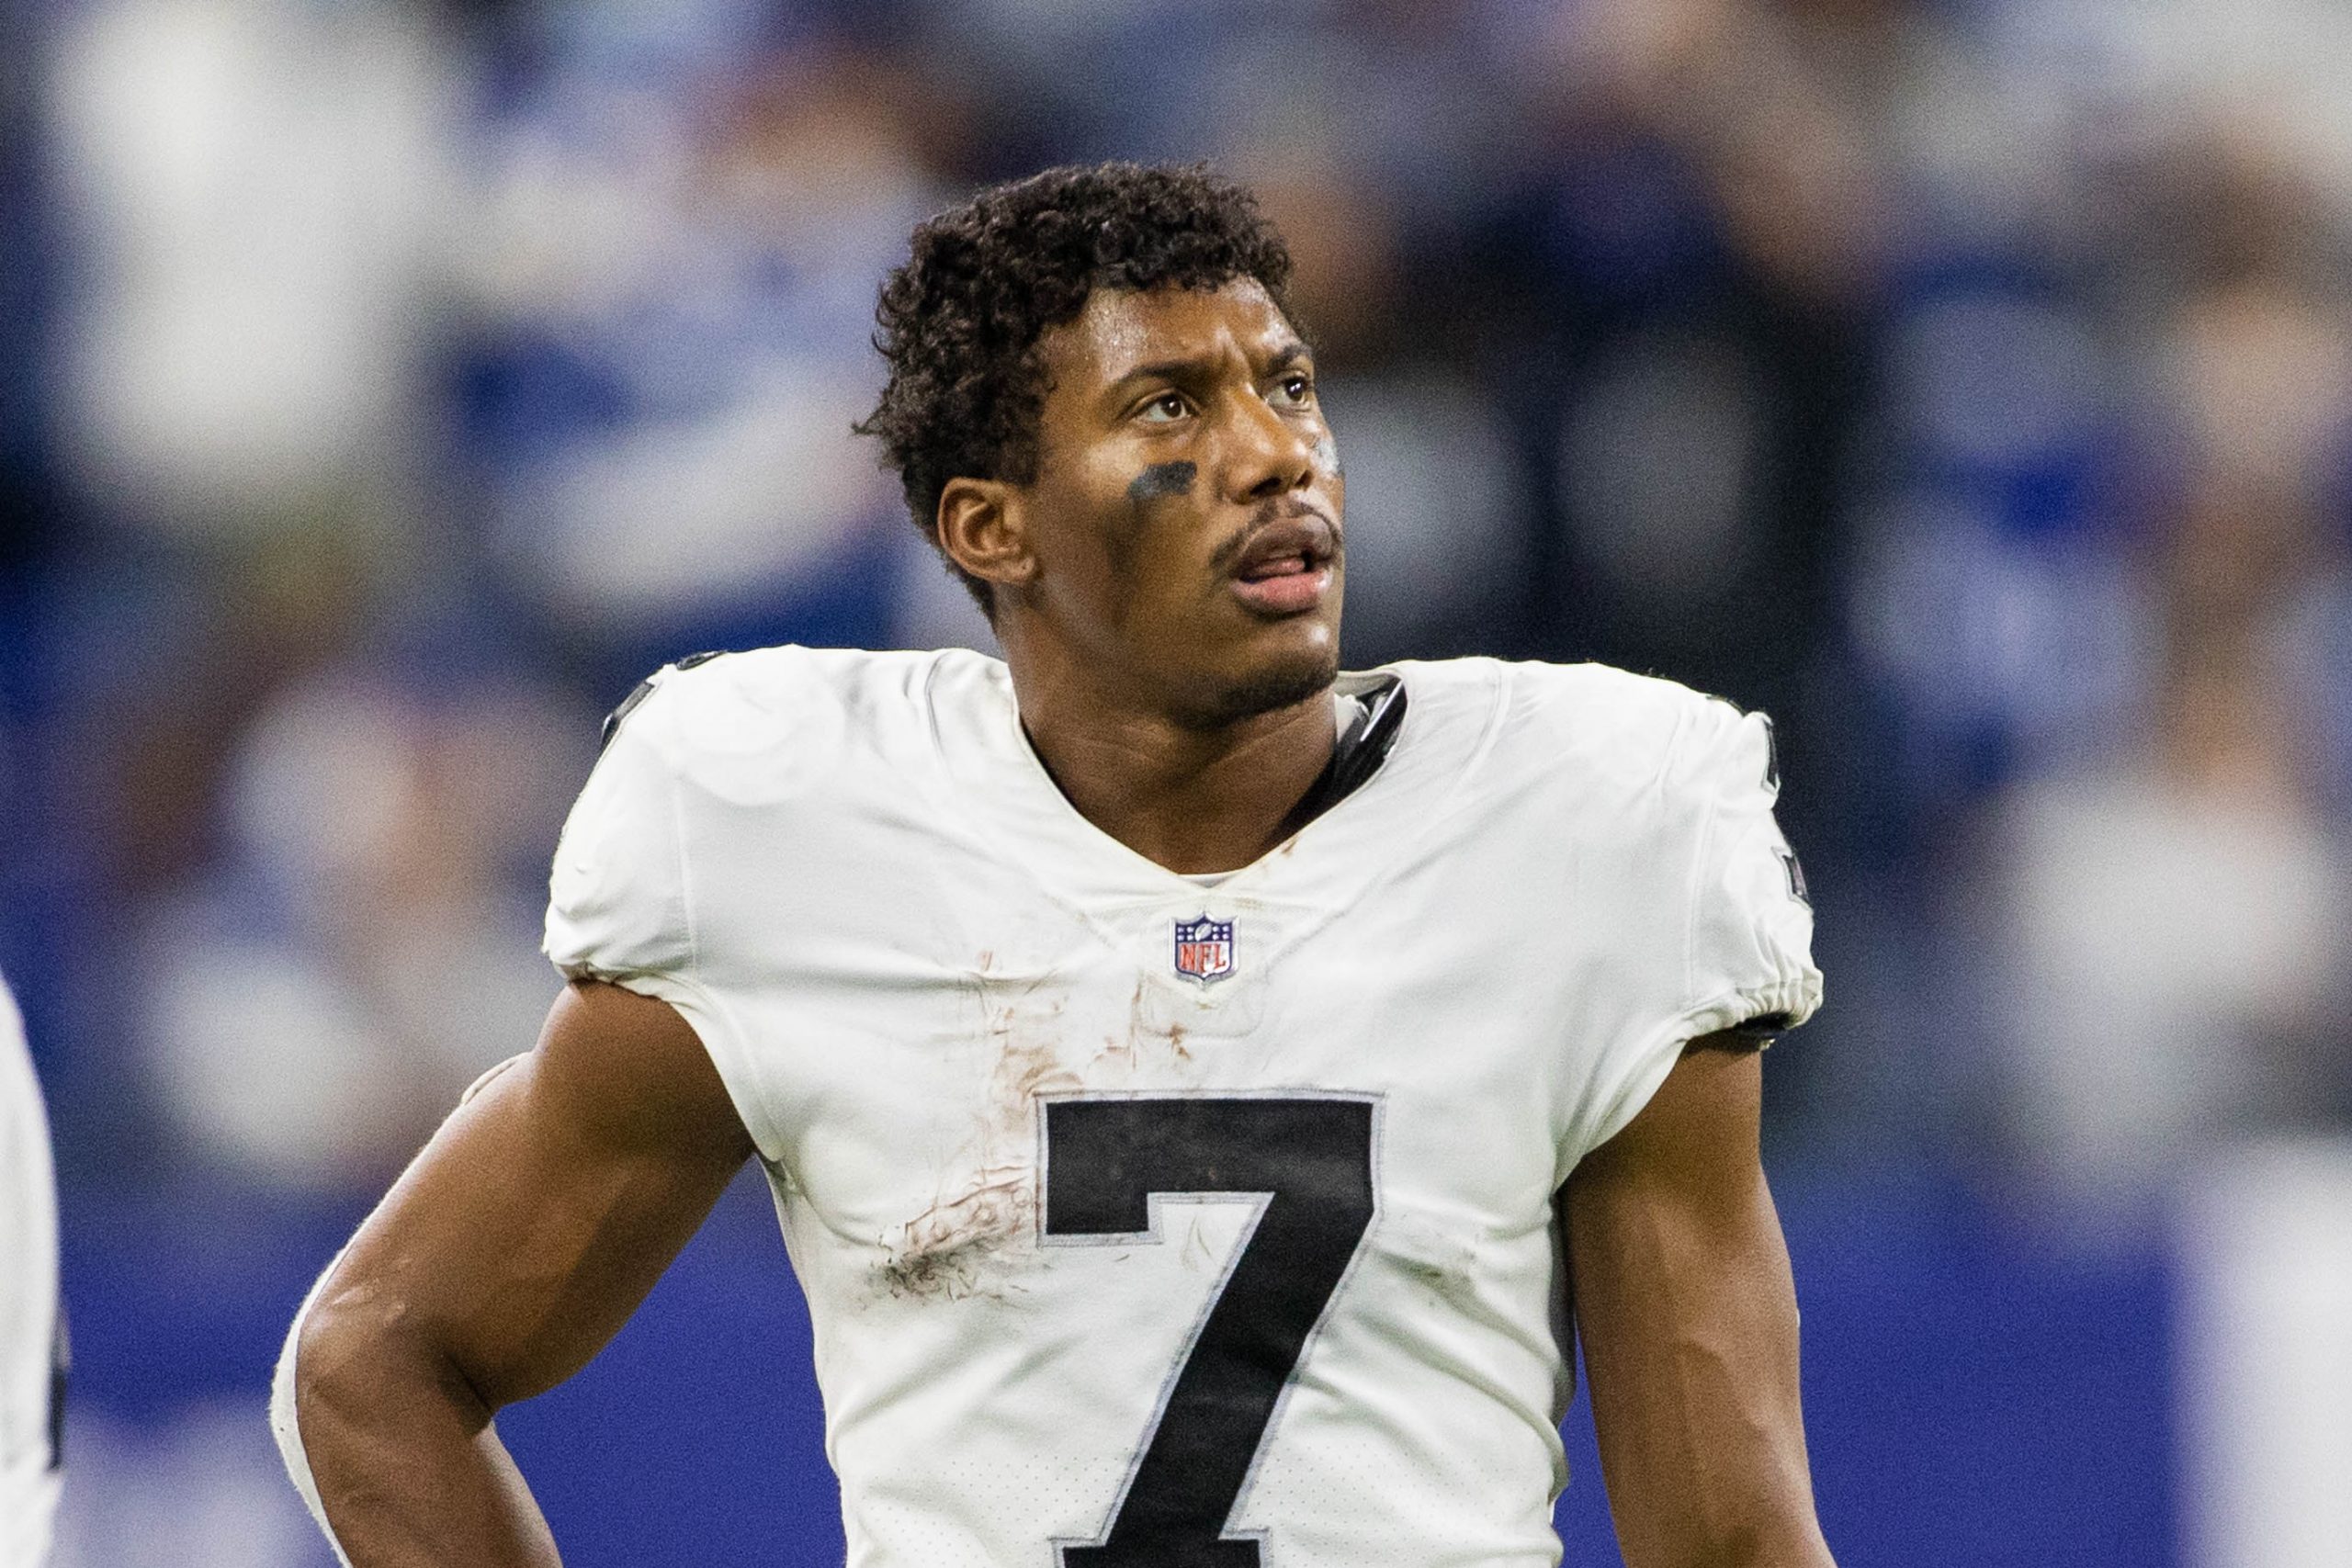 Las Vegas Raiders wide receiver Zay Jones (7) in the second half against the Indianapolis Colts at Lucas Oil Stadium